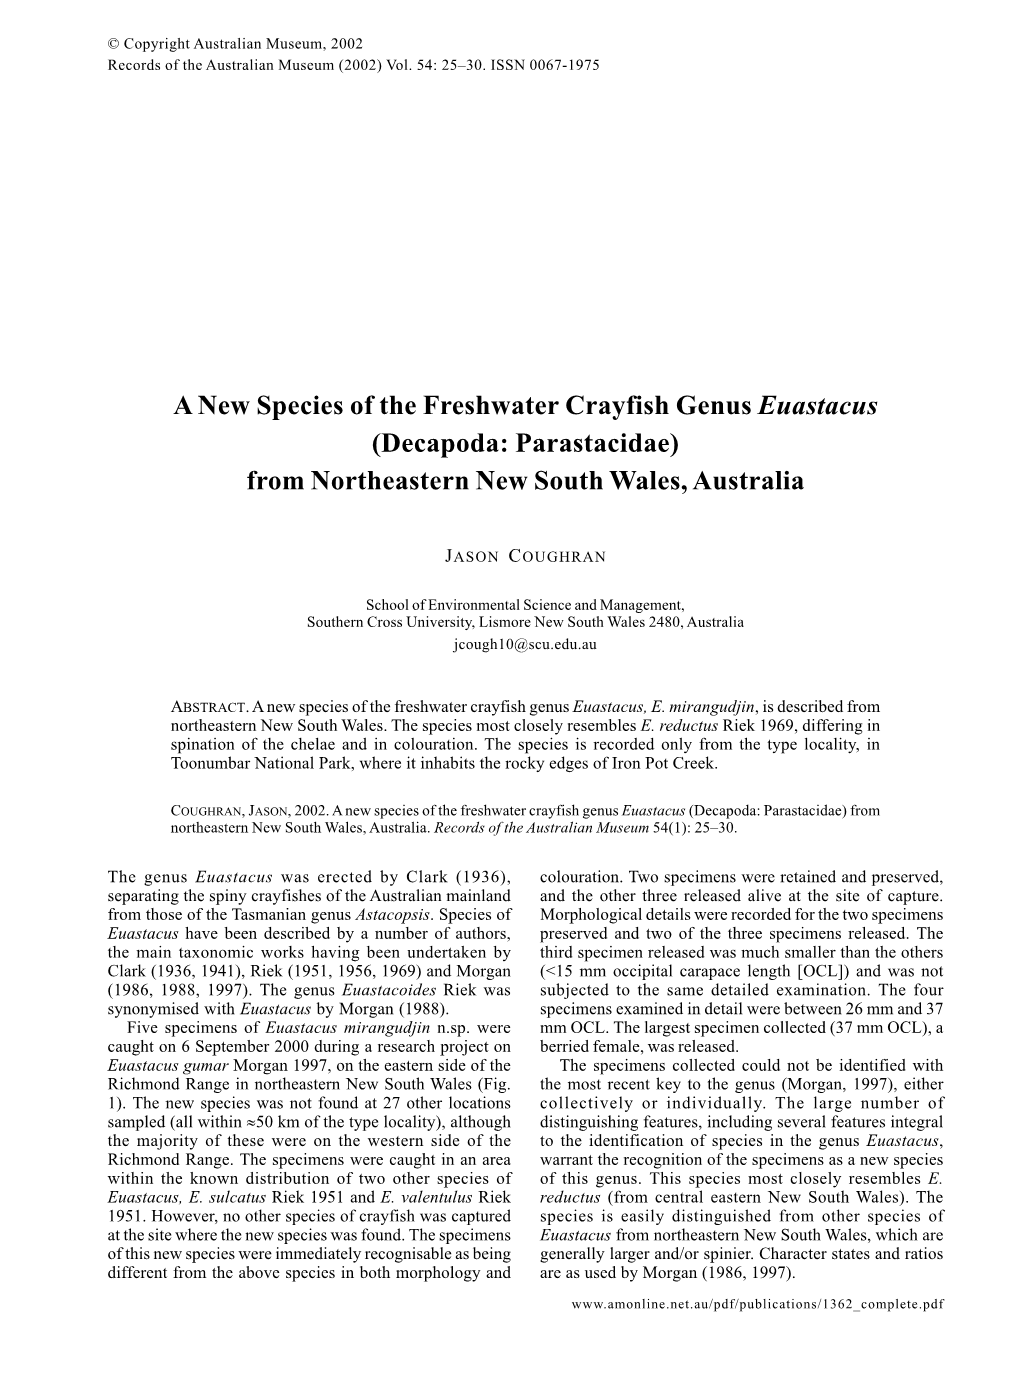 A New Species of the Freshwater Crayfish Genus Euastacus (Decapoda: Parastacidae) from Northeastern New South Wales, Australia